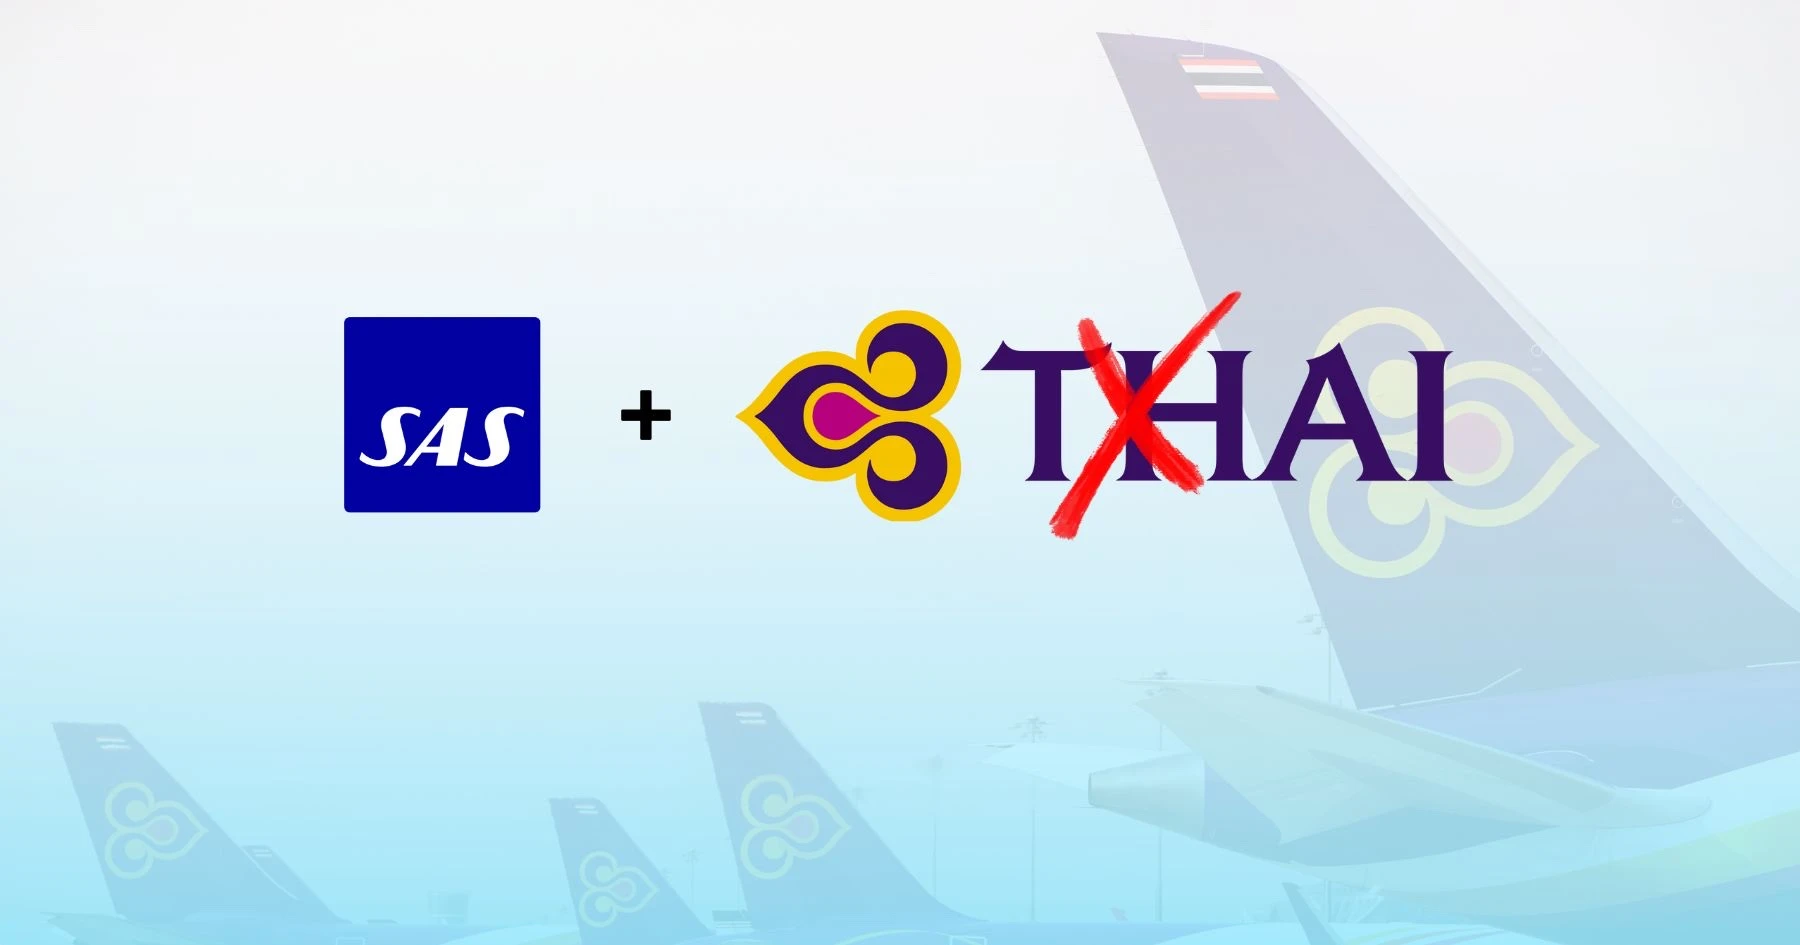 During April, a system glith prevented EuroBonus members to book book Thai flights with EuroBonus points.